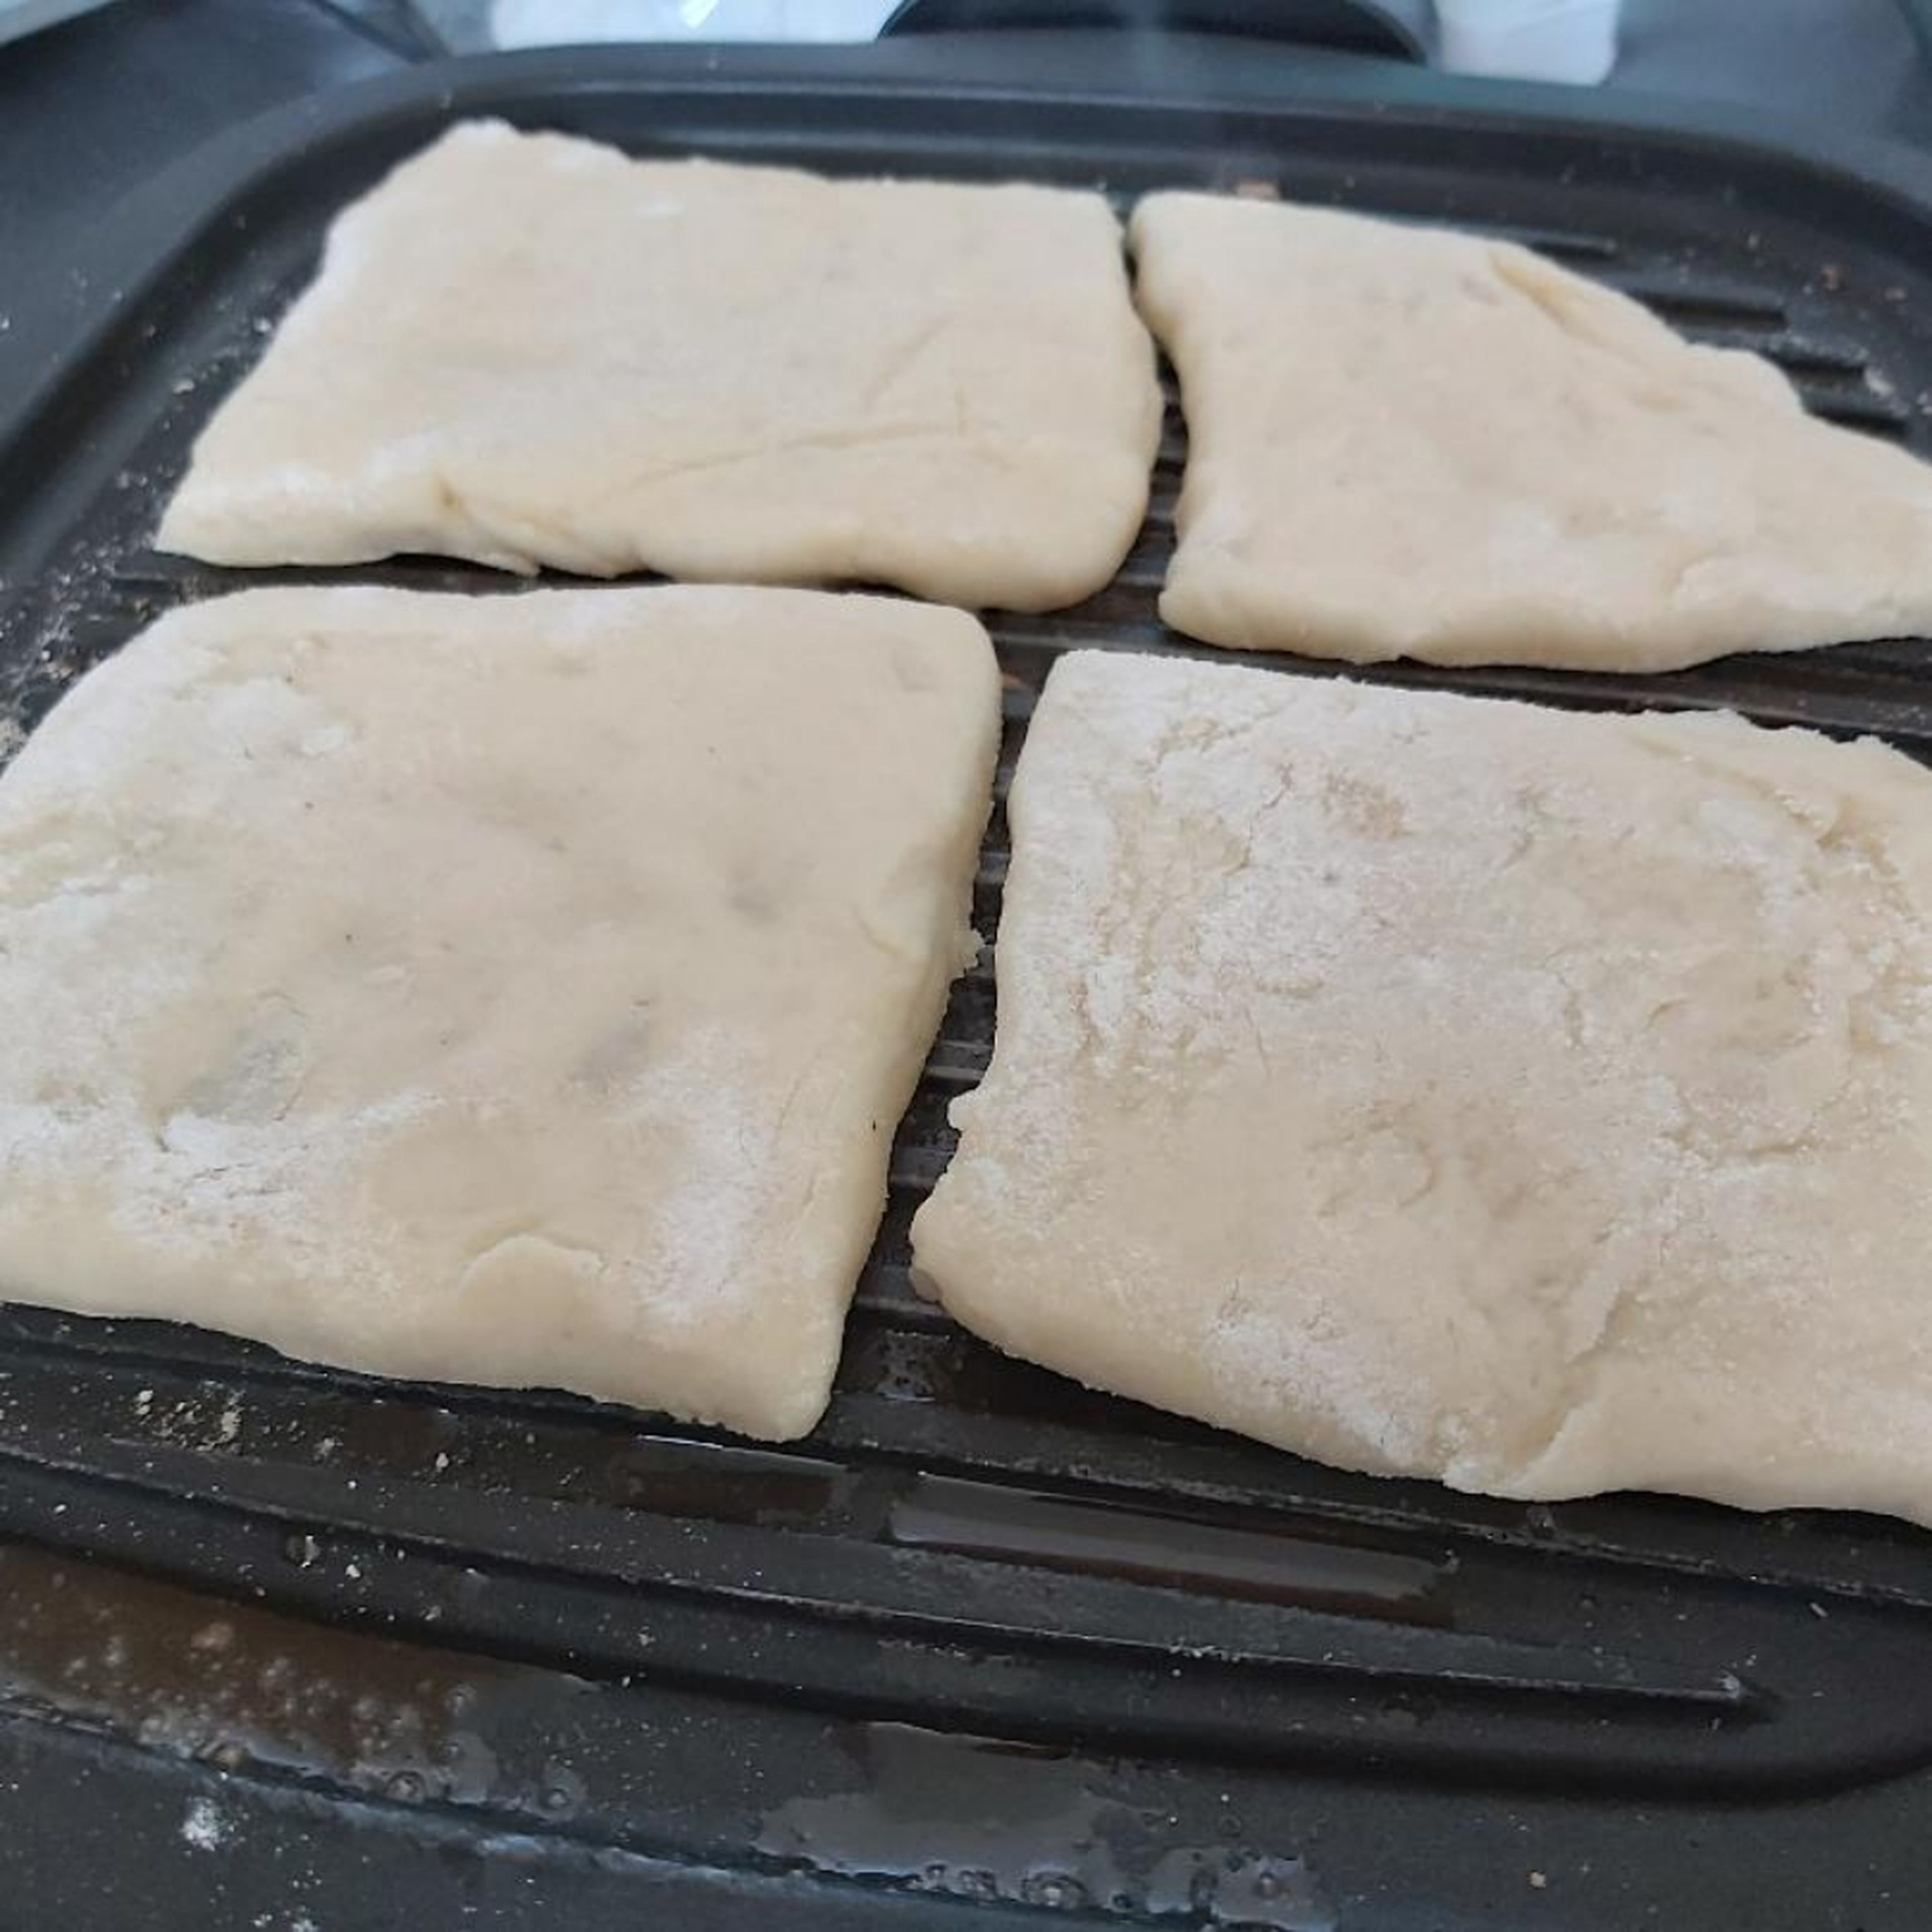 cut into squares or triangles, and cook on greased griddle high heat for 4-5 mins each side.